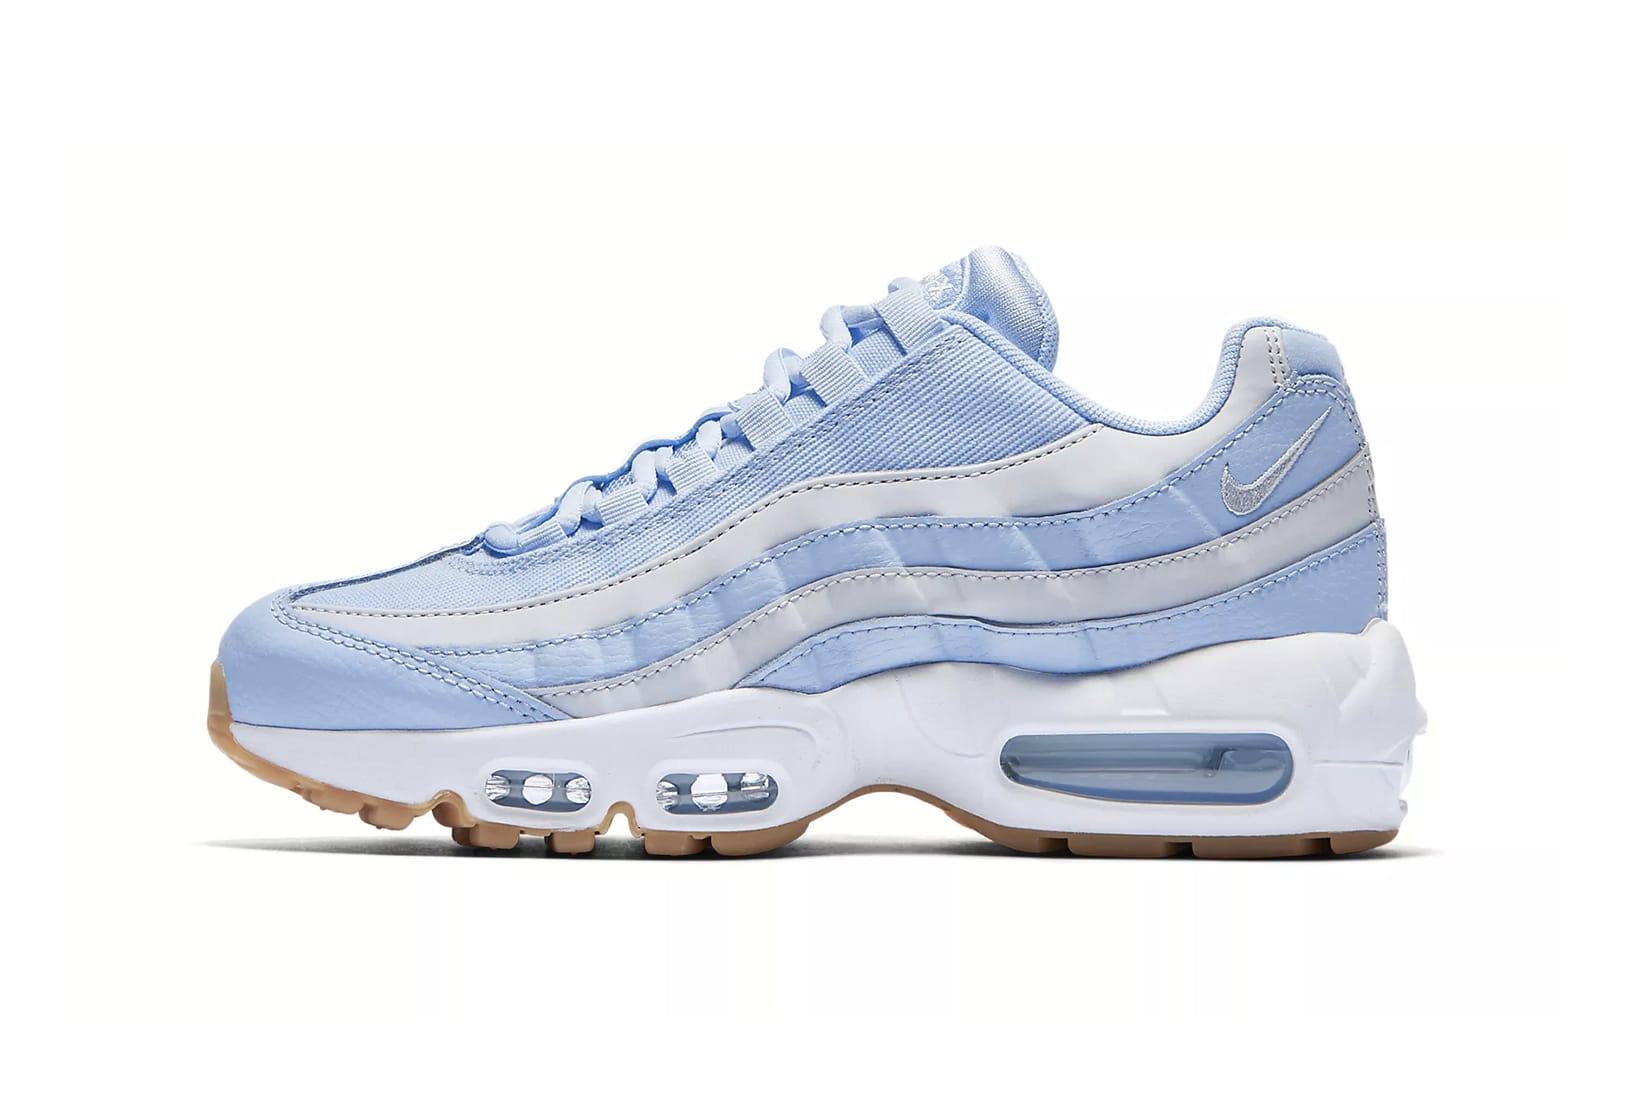 Air Max 95 in Baby Blue \